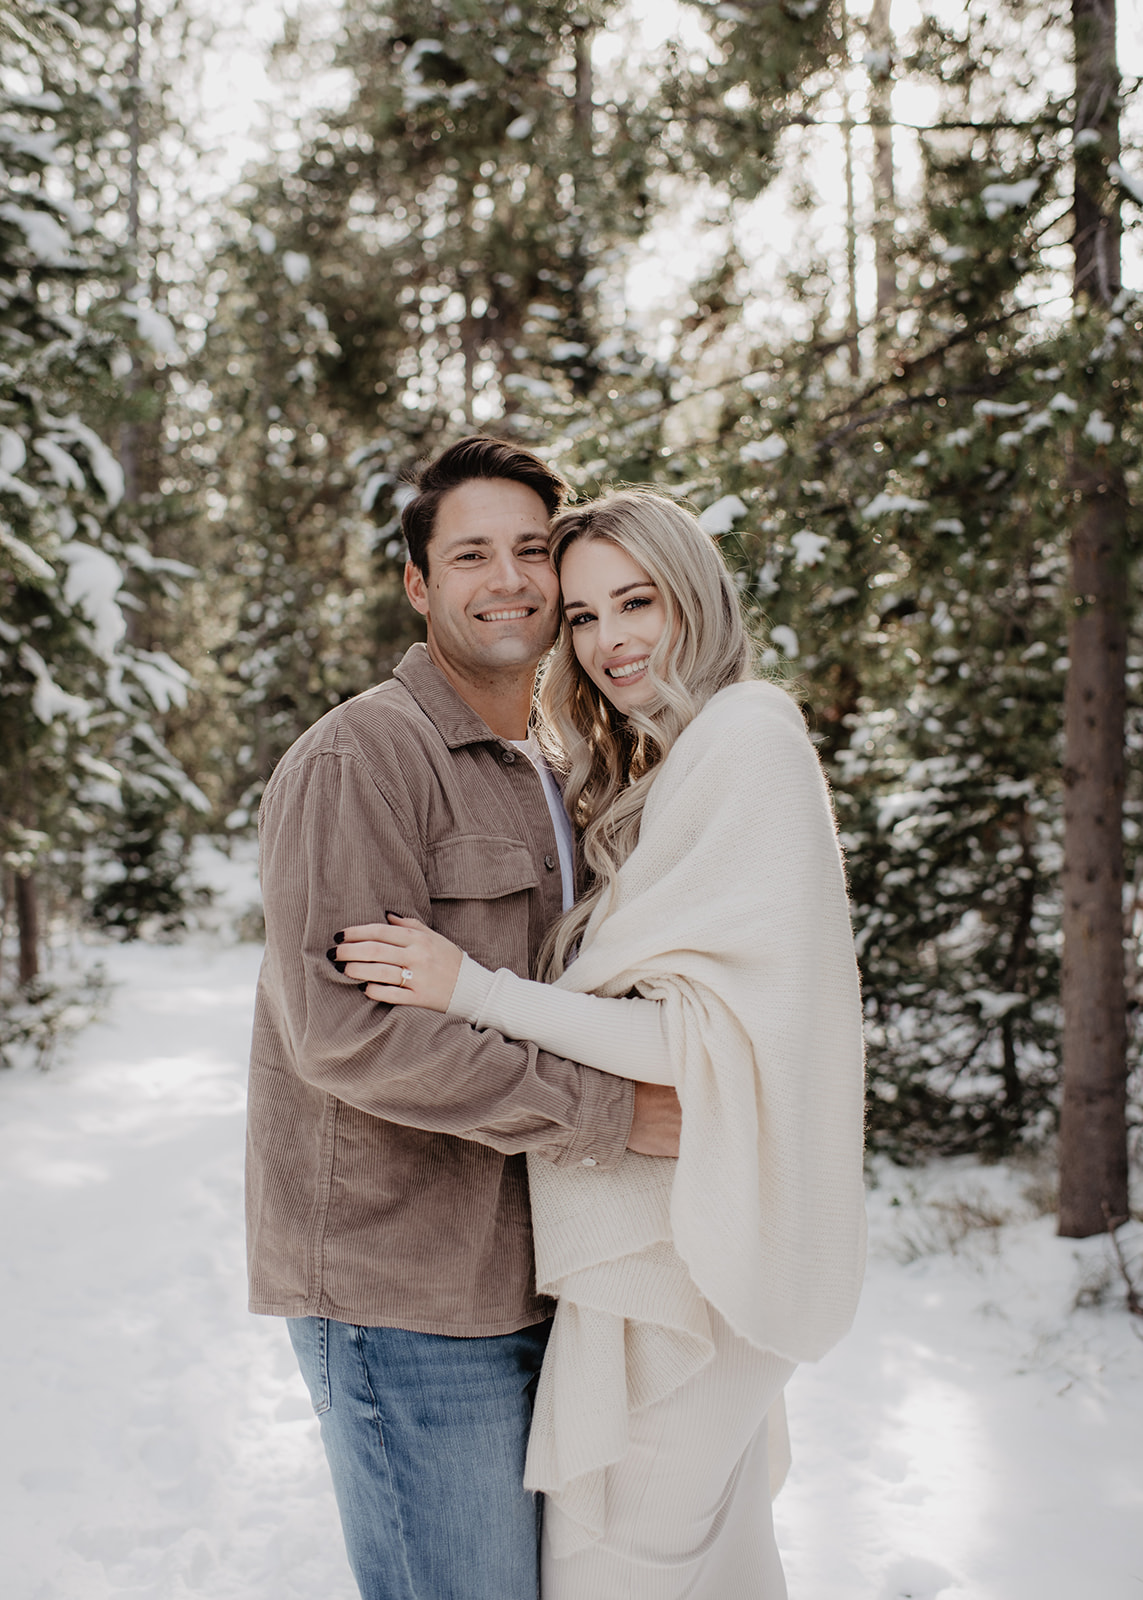 woodland engagement pictures in Jackson Hole with man and woman embracing in the forrest surrounded by snow photographed by Jackson Hole wedding photographer